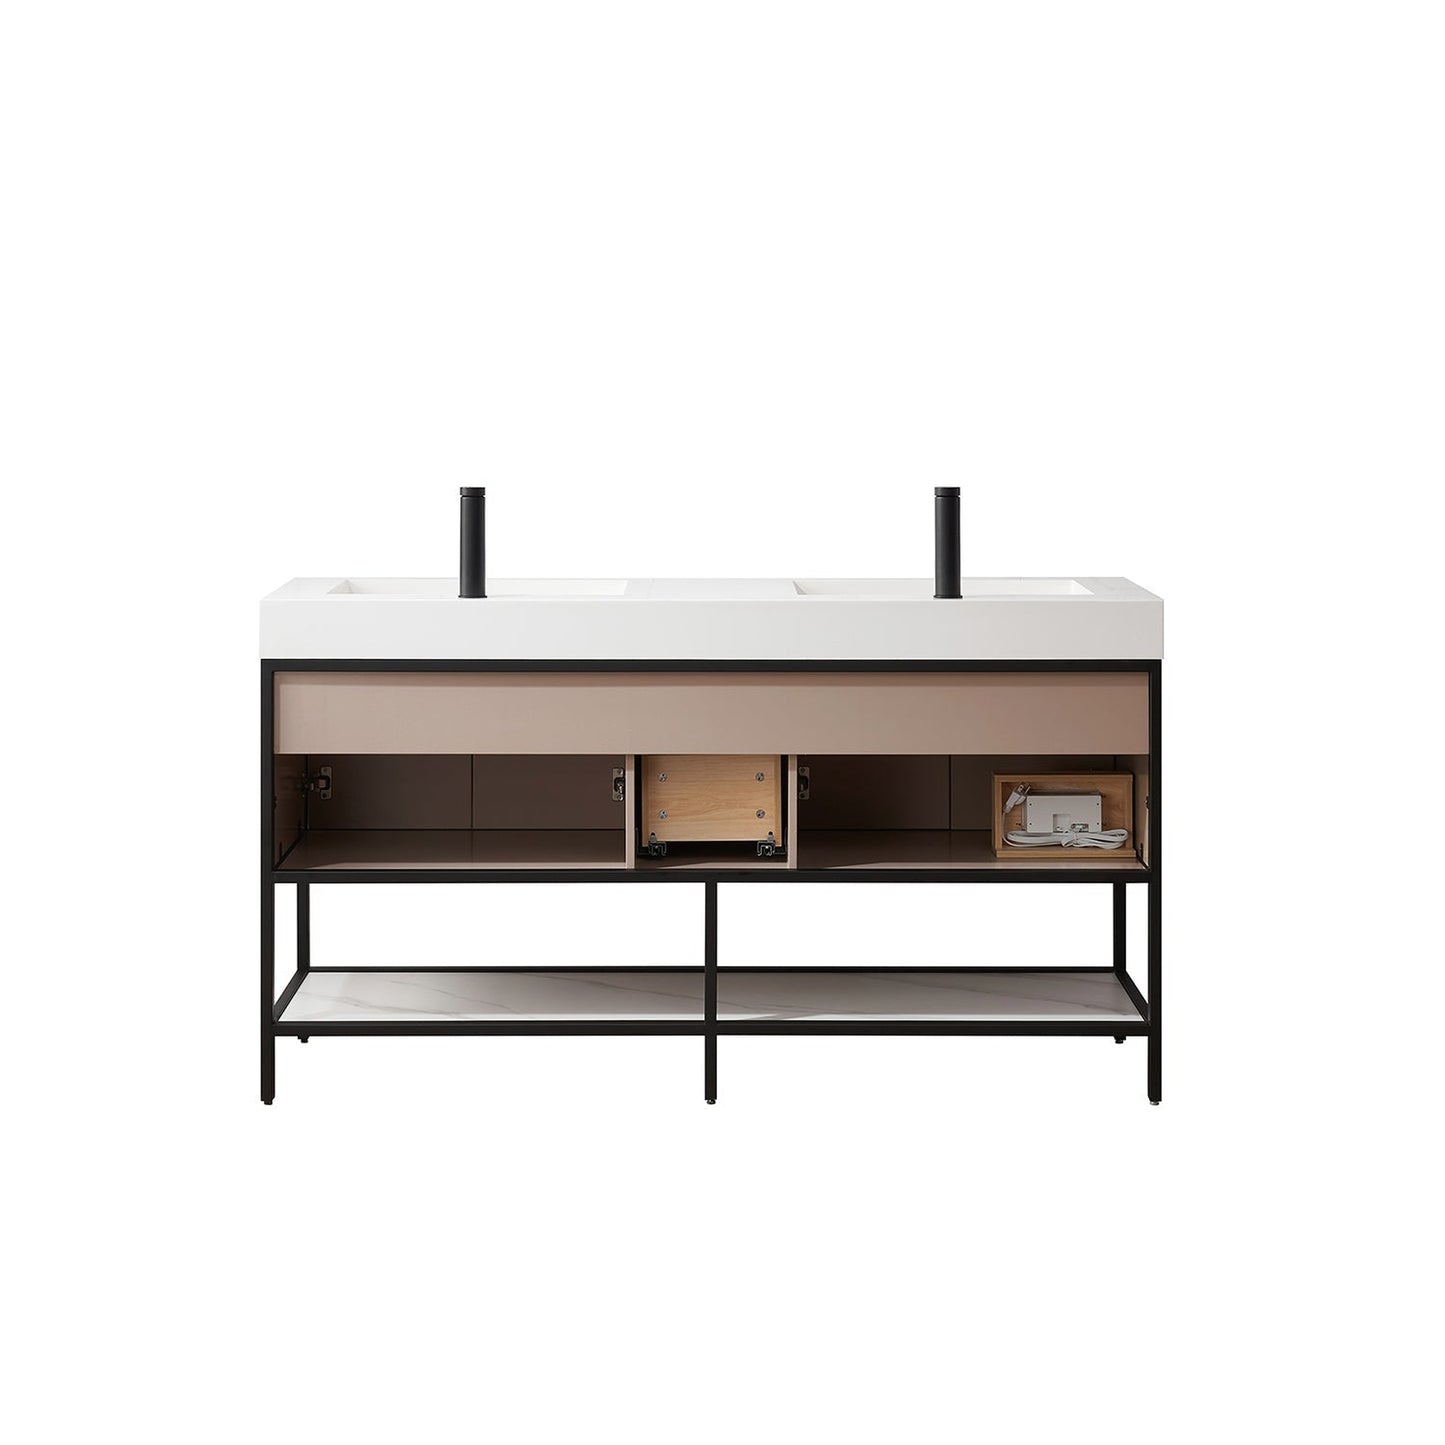 Vinnova Marcilla 60" Double Sink Bath Vanity In Almond Coffee With One-Piece Composite Stone Sink Top And Mirror